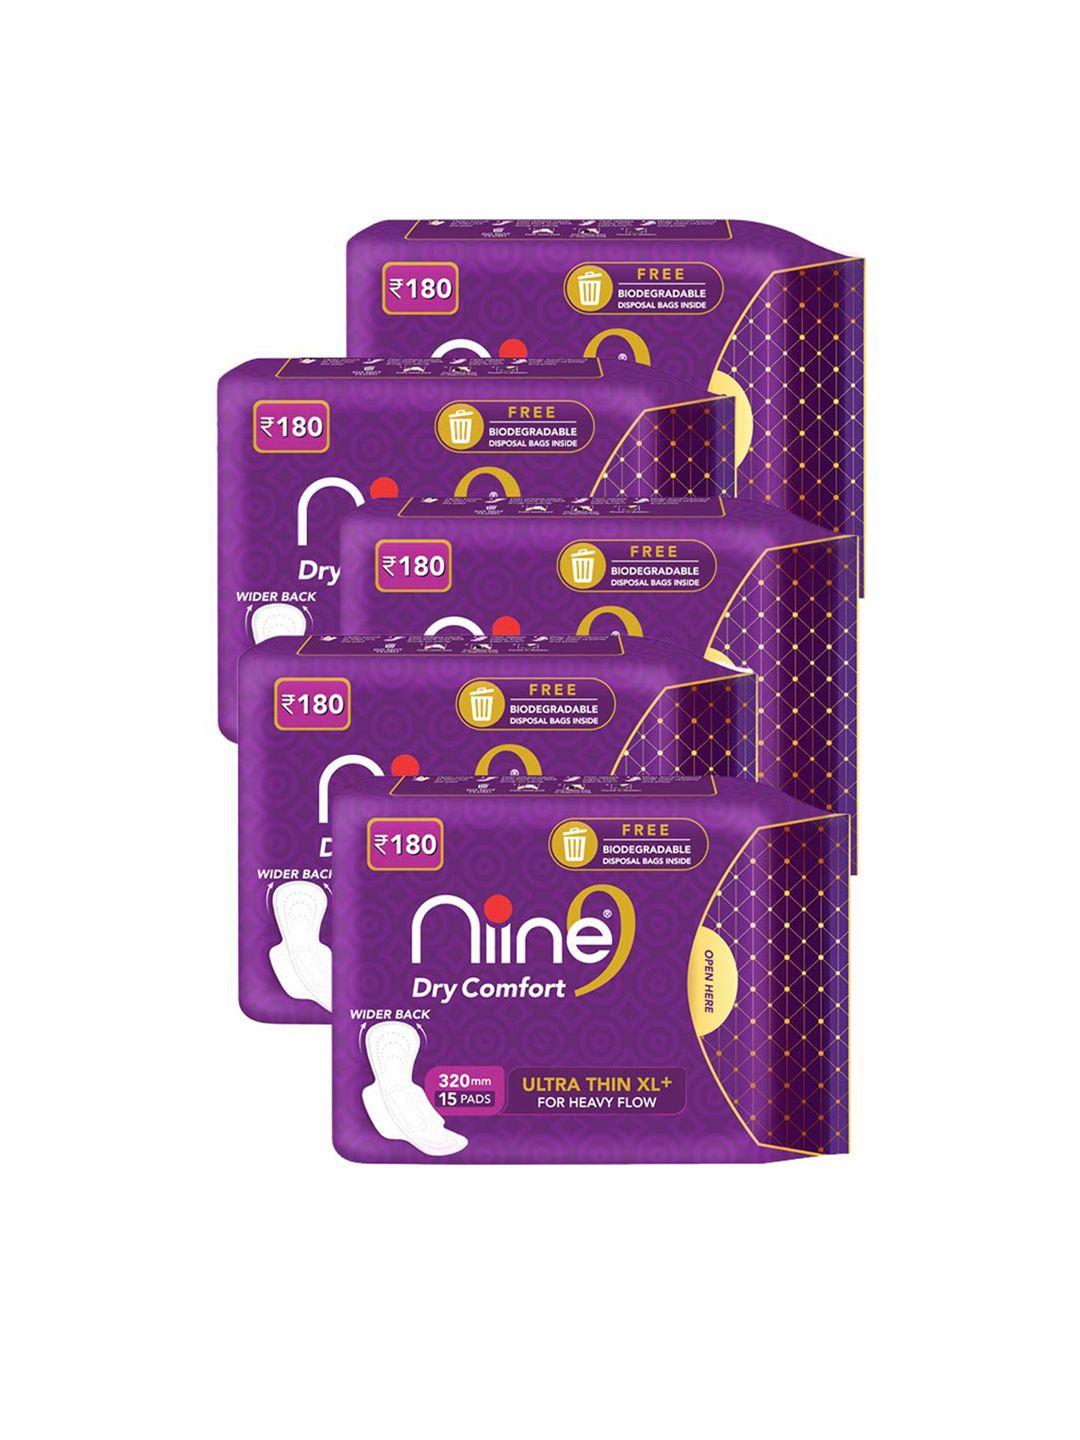 niine-set-of-5-dry-comfort-ultra-thin-xl-sanitary-pads-for-heavy-flow---15-pads-per-pack